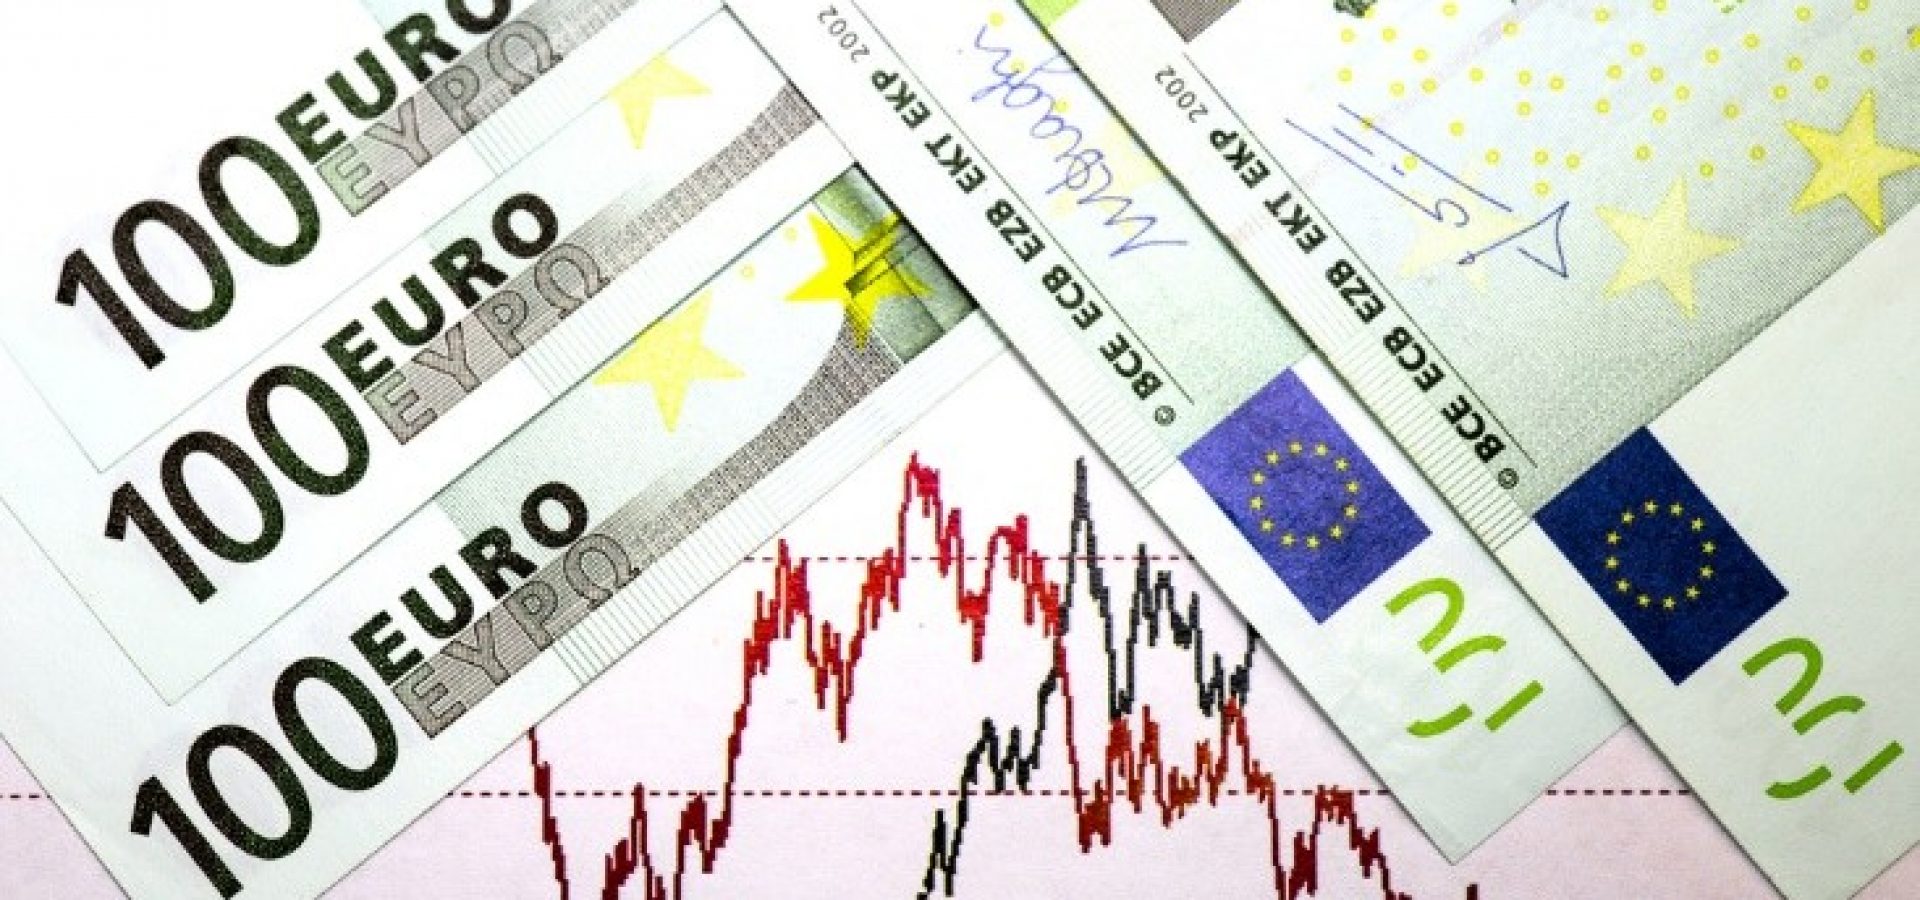 stock exchanges concept with euro bills and graphs – wibestbroker